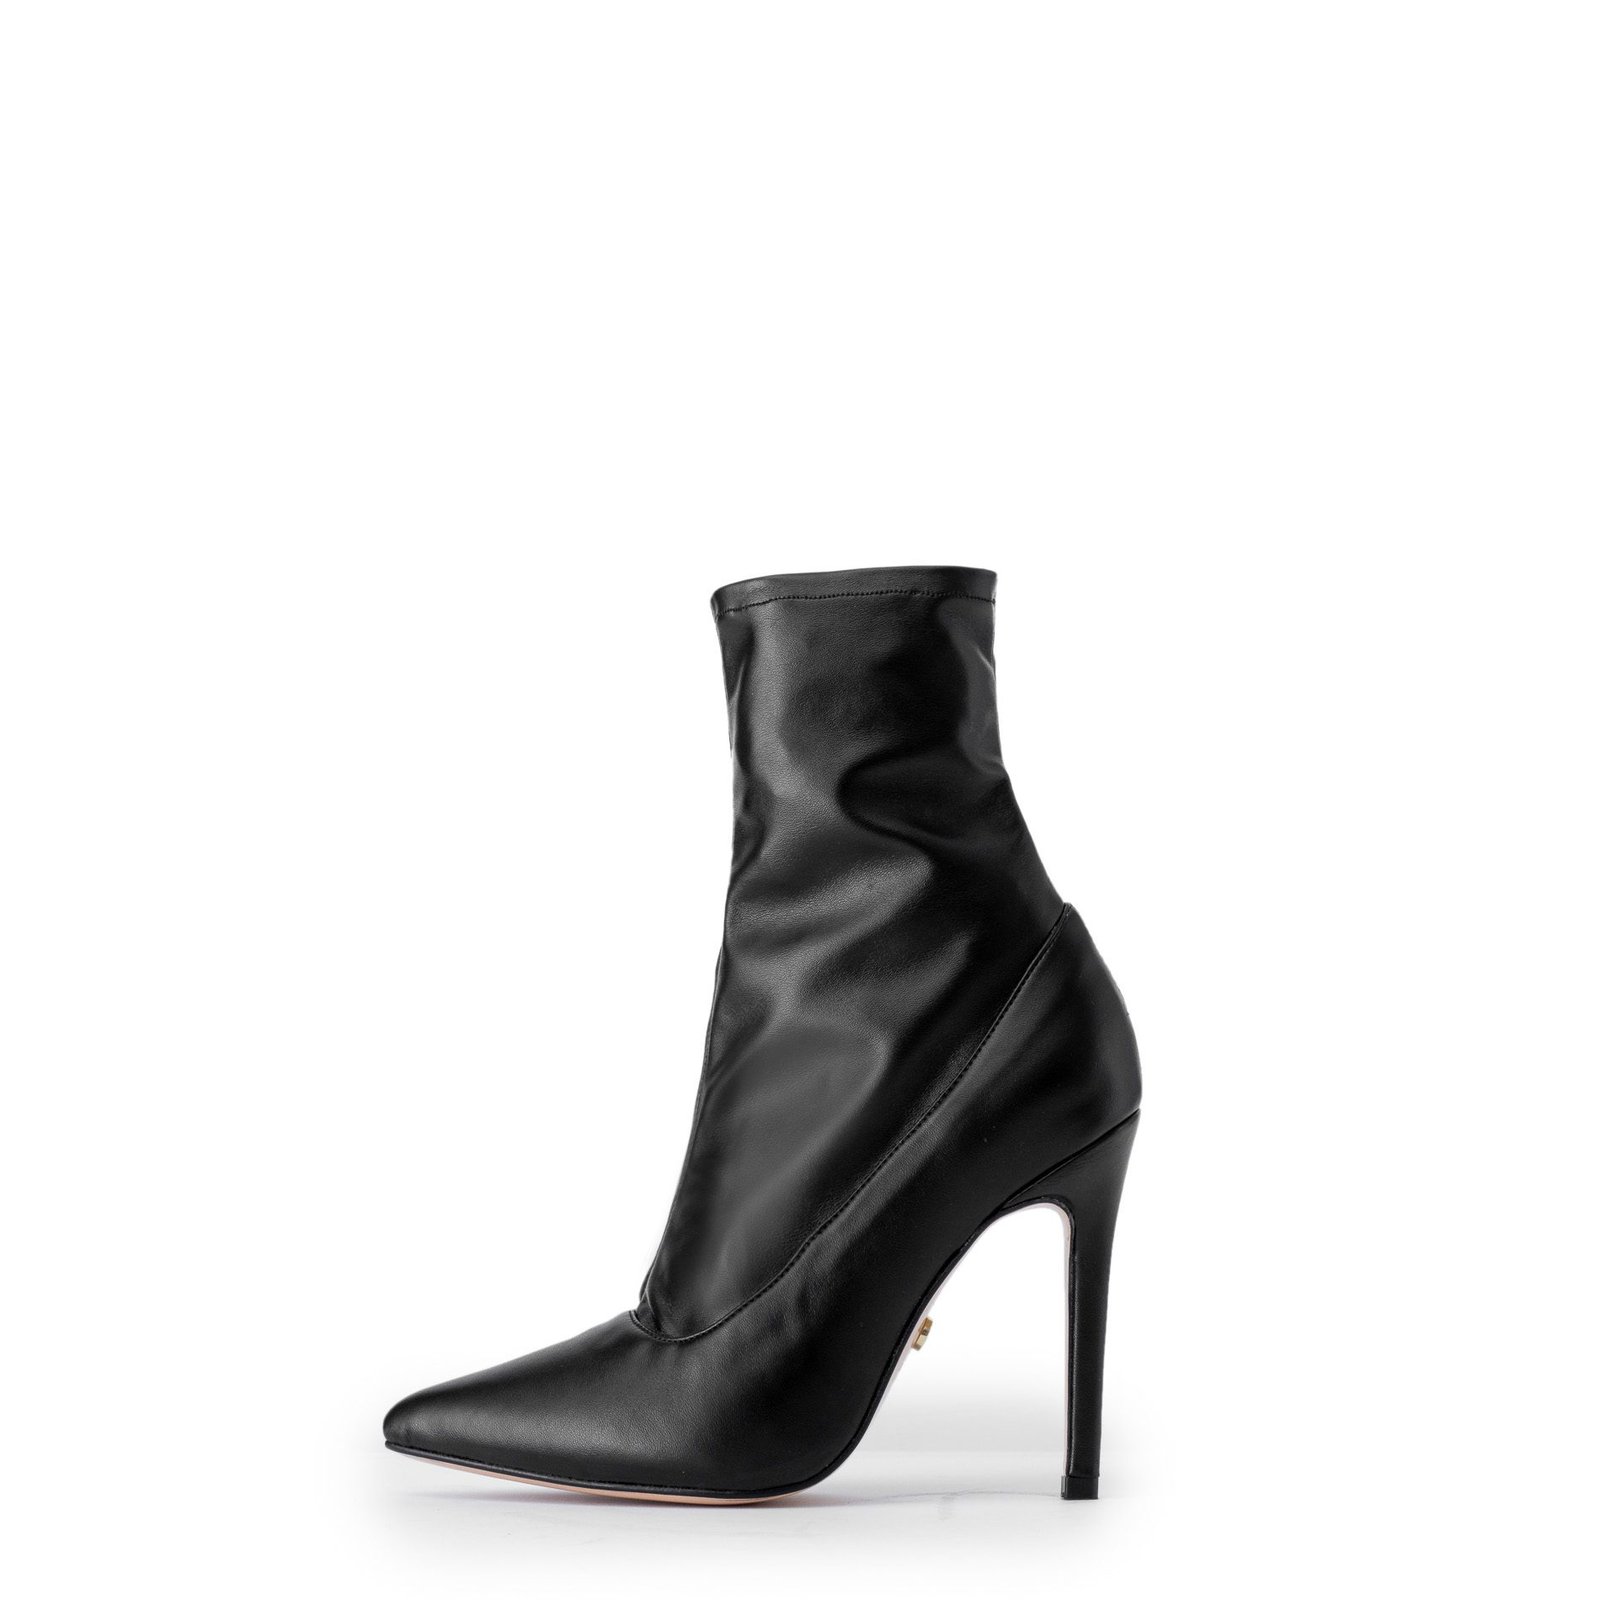 Black pointed toe bootie